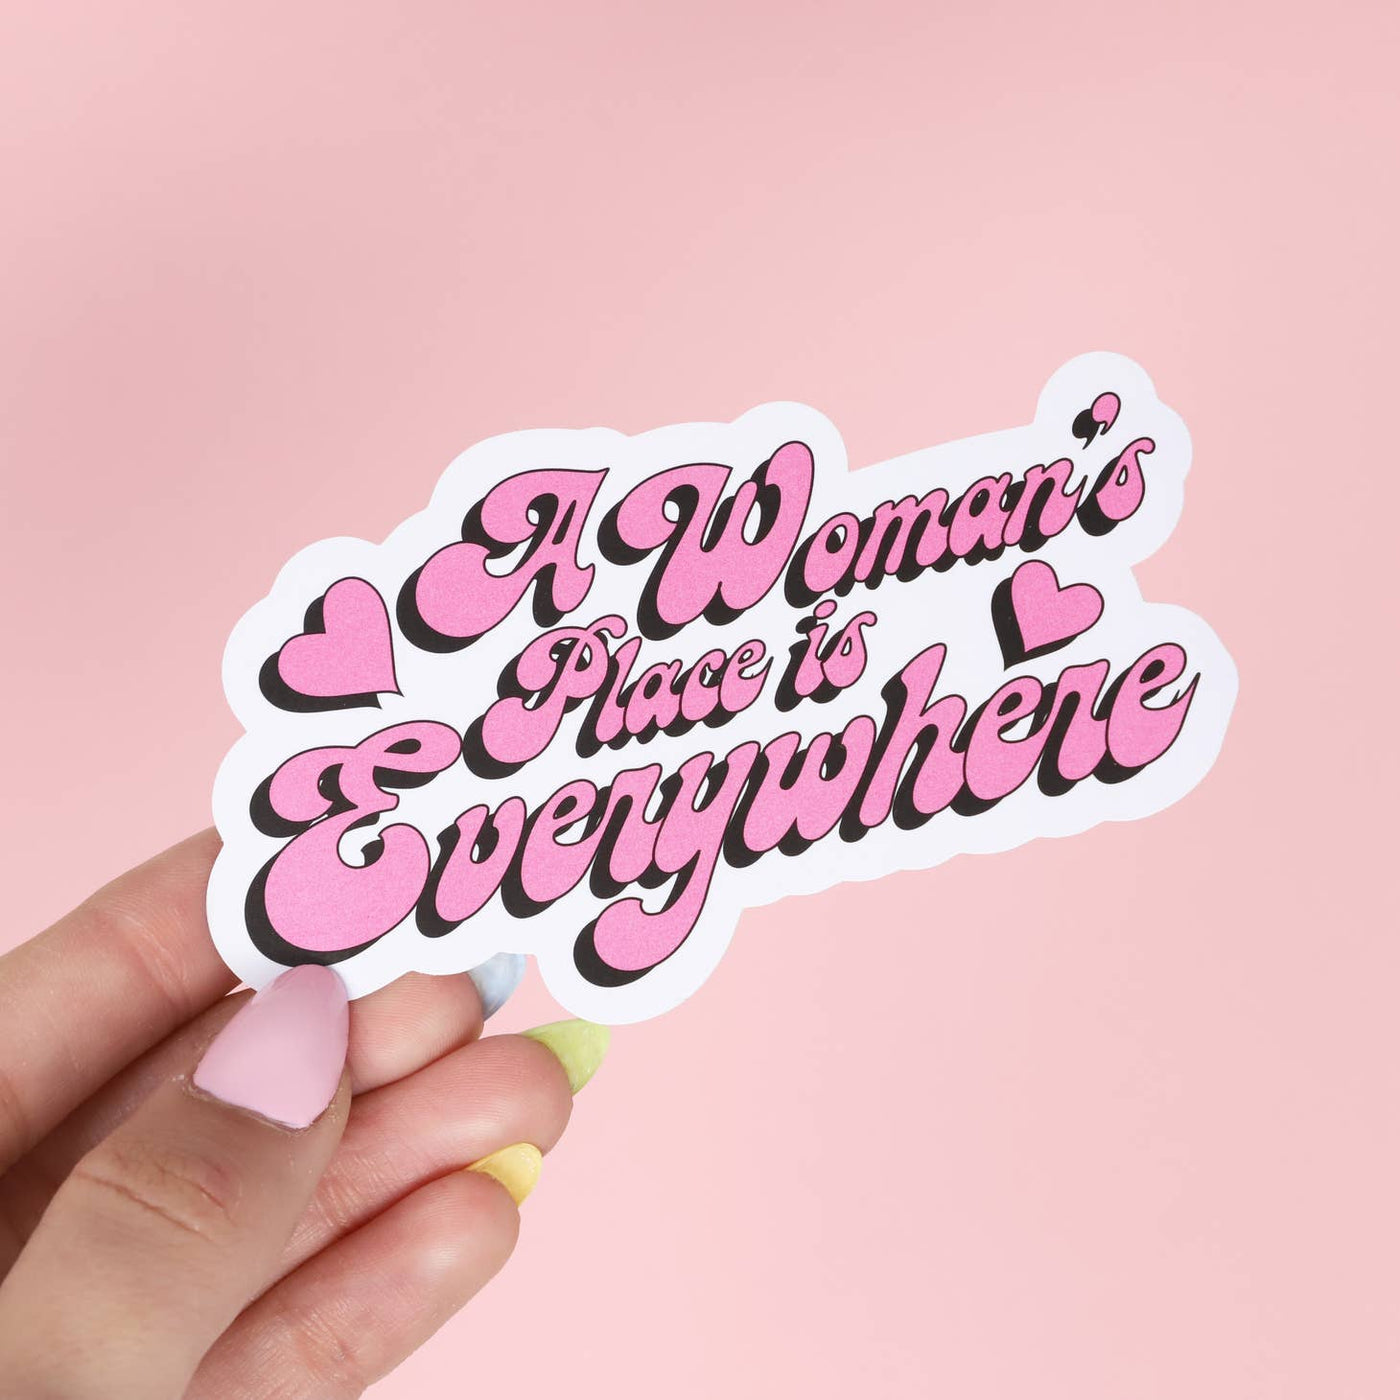 A Woman's Place Is Everywhere Sticker